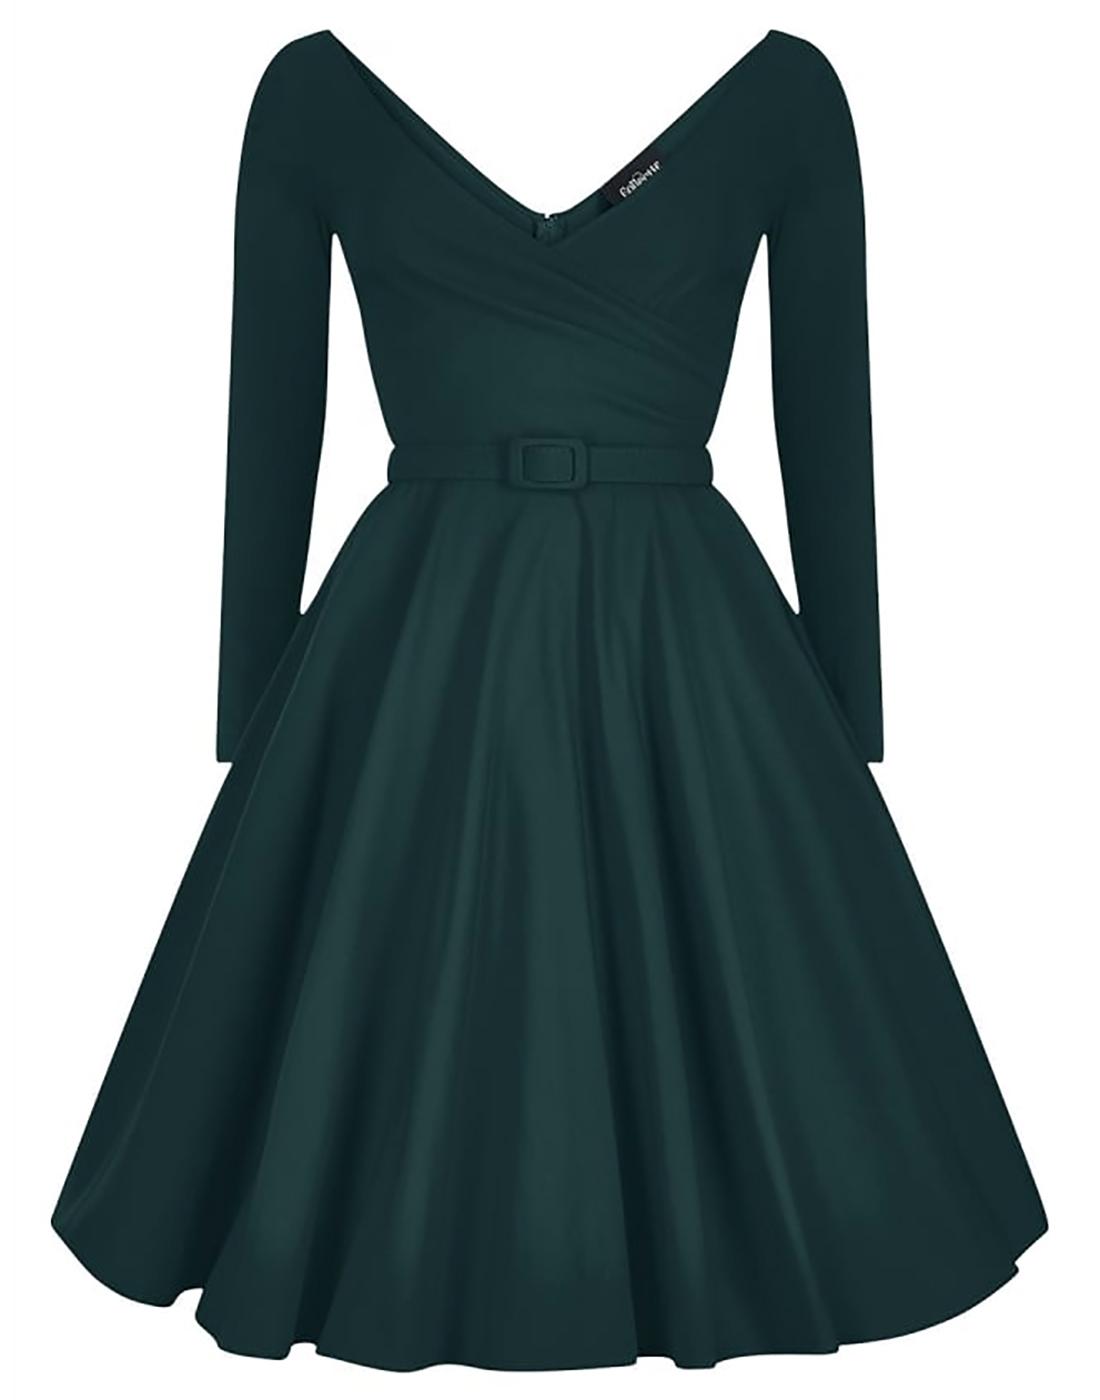 Nicky COLLECTIF Retro Vintage 50s Party Dress Teal